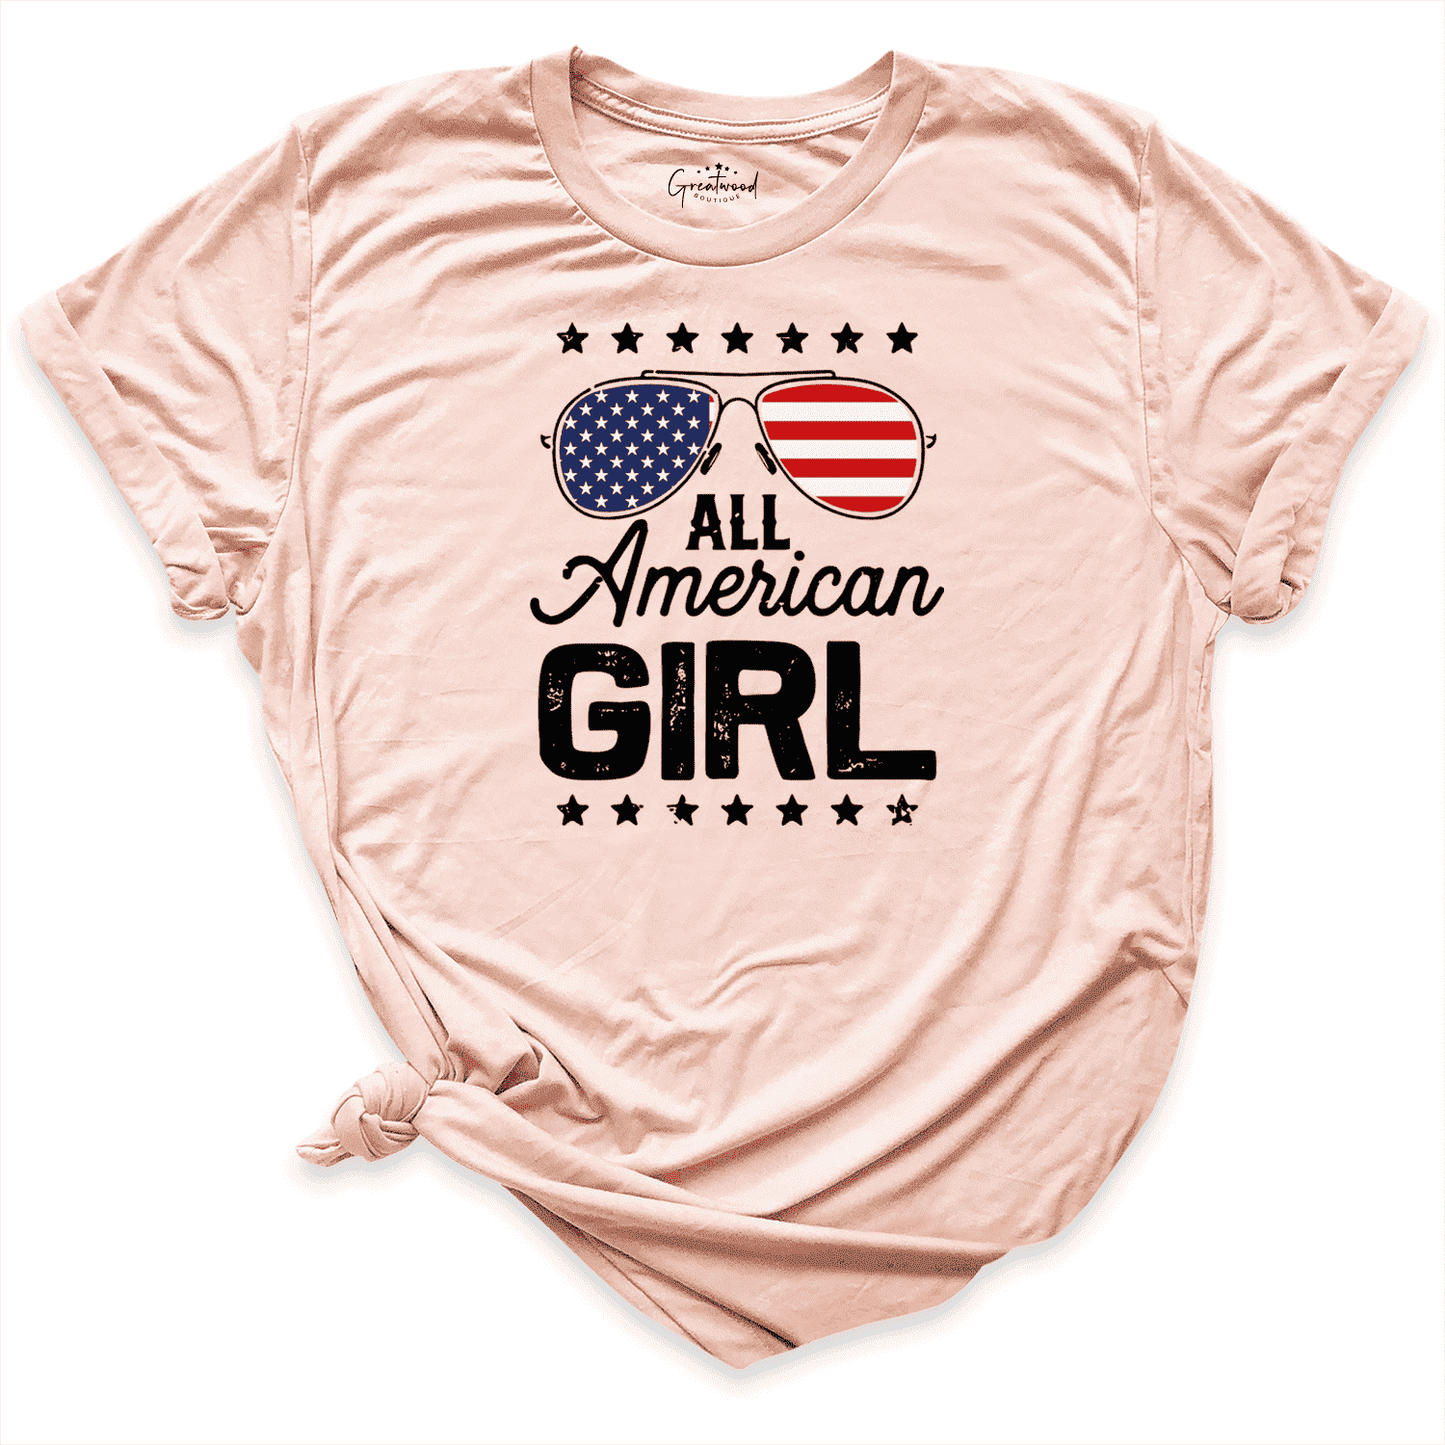 All American Girl Shirt Peach - Greatwood Boutique